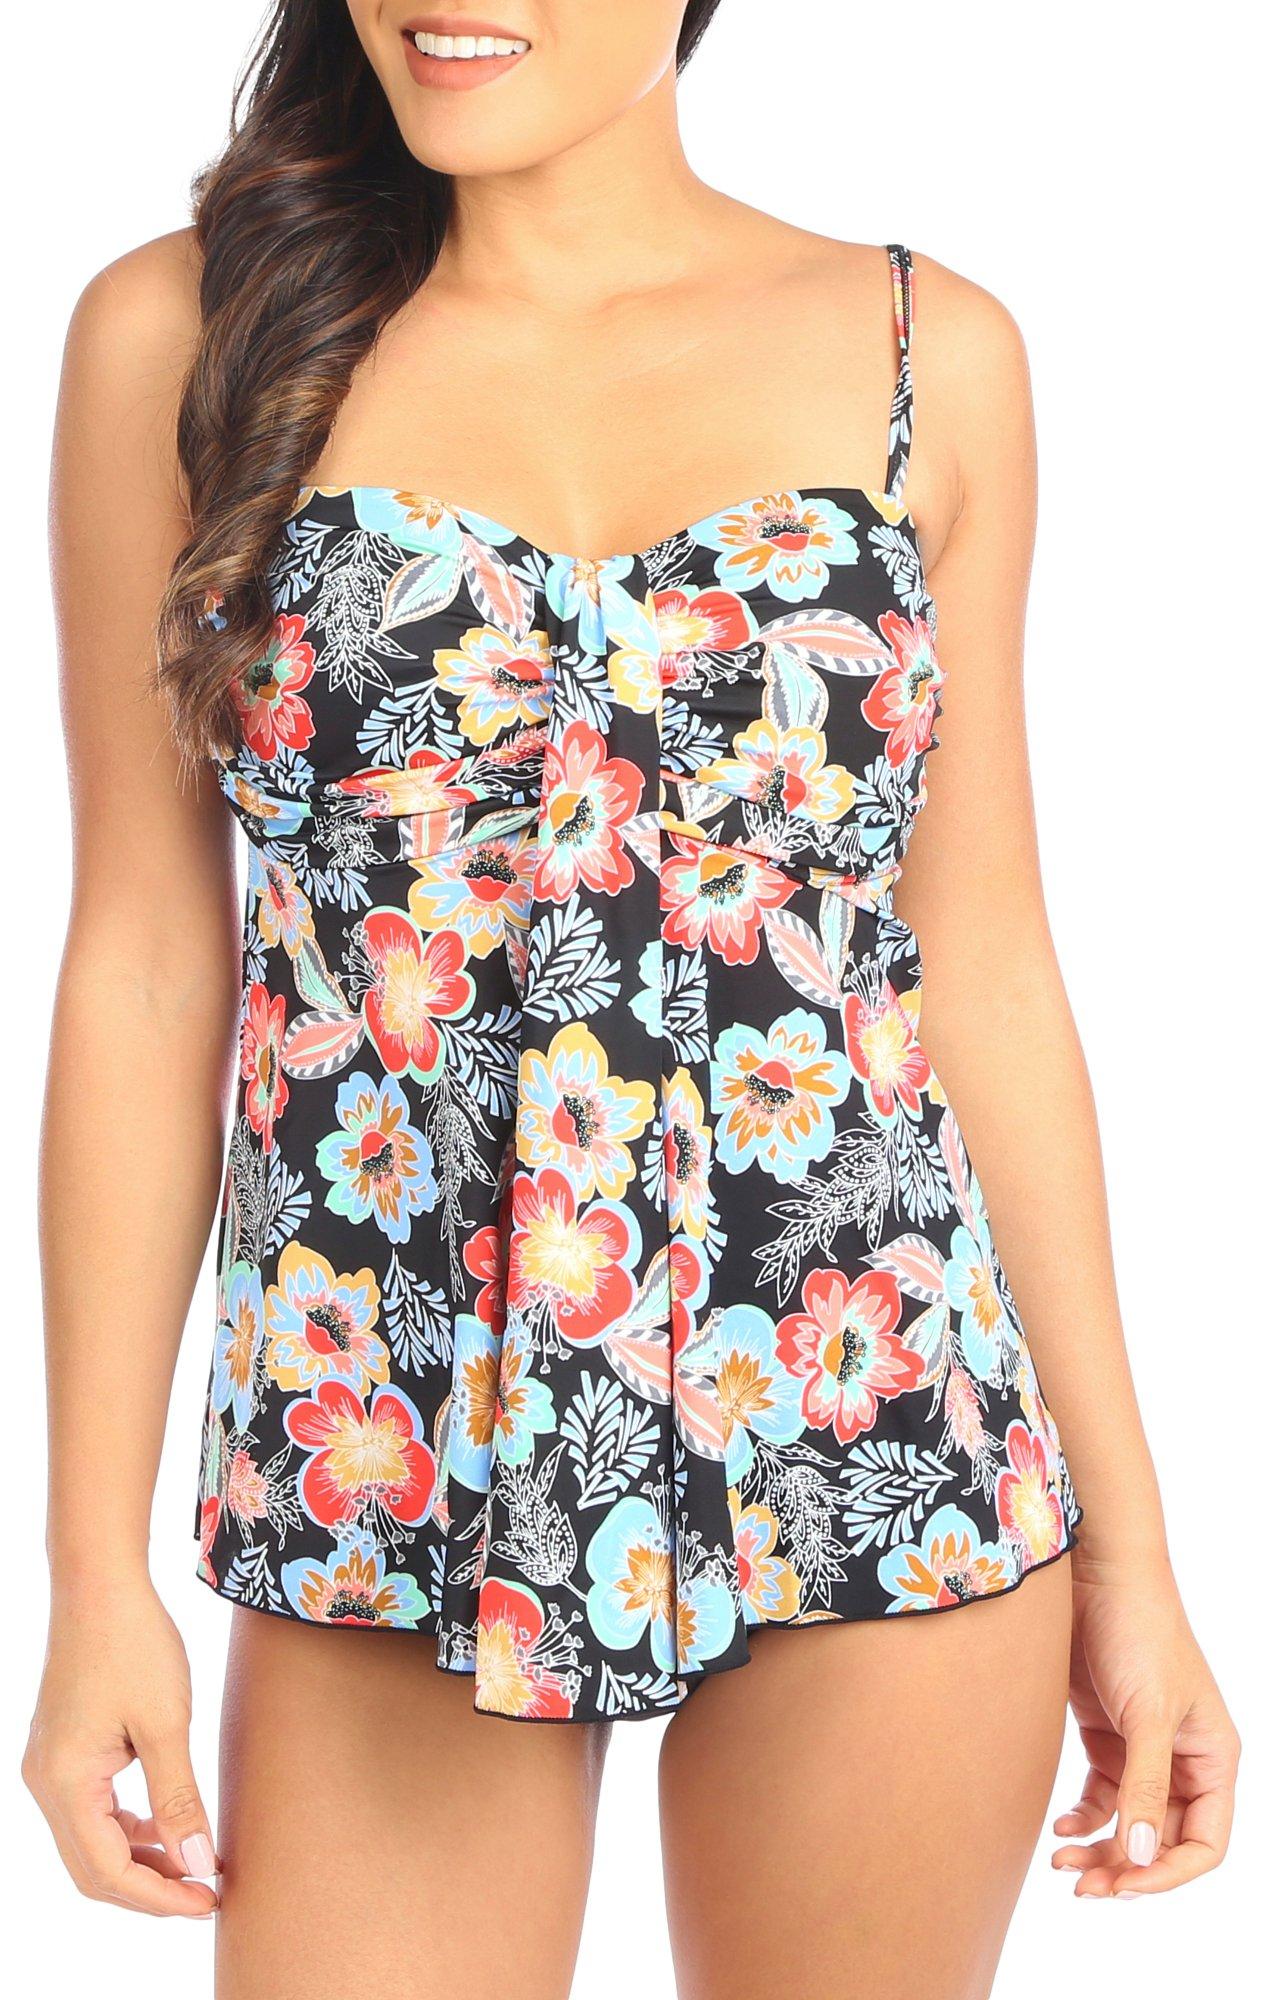 A Shore Fit Womens Floral Waterfall Tankini Top